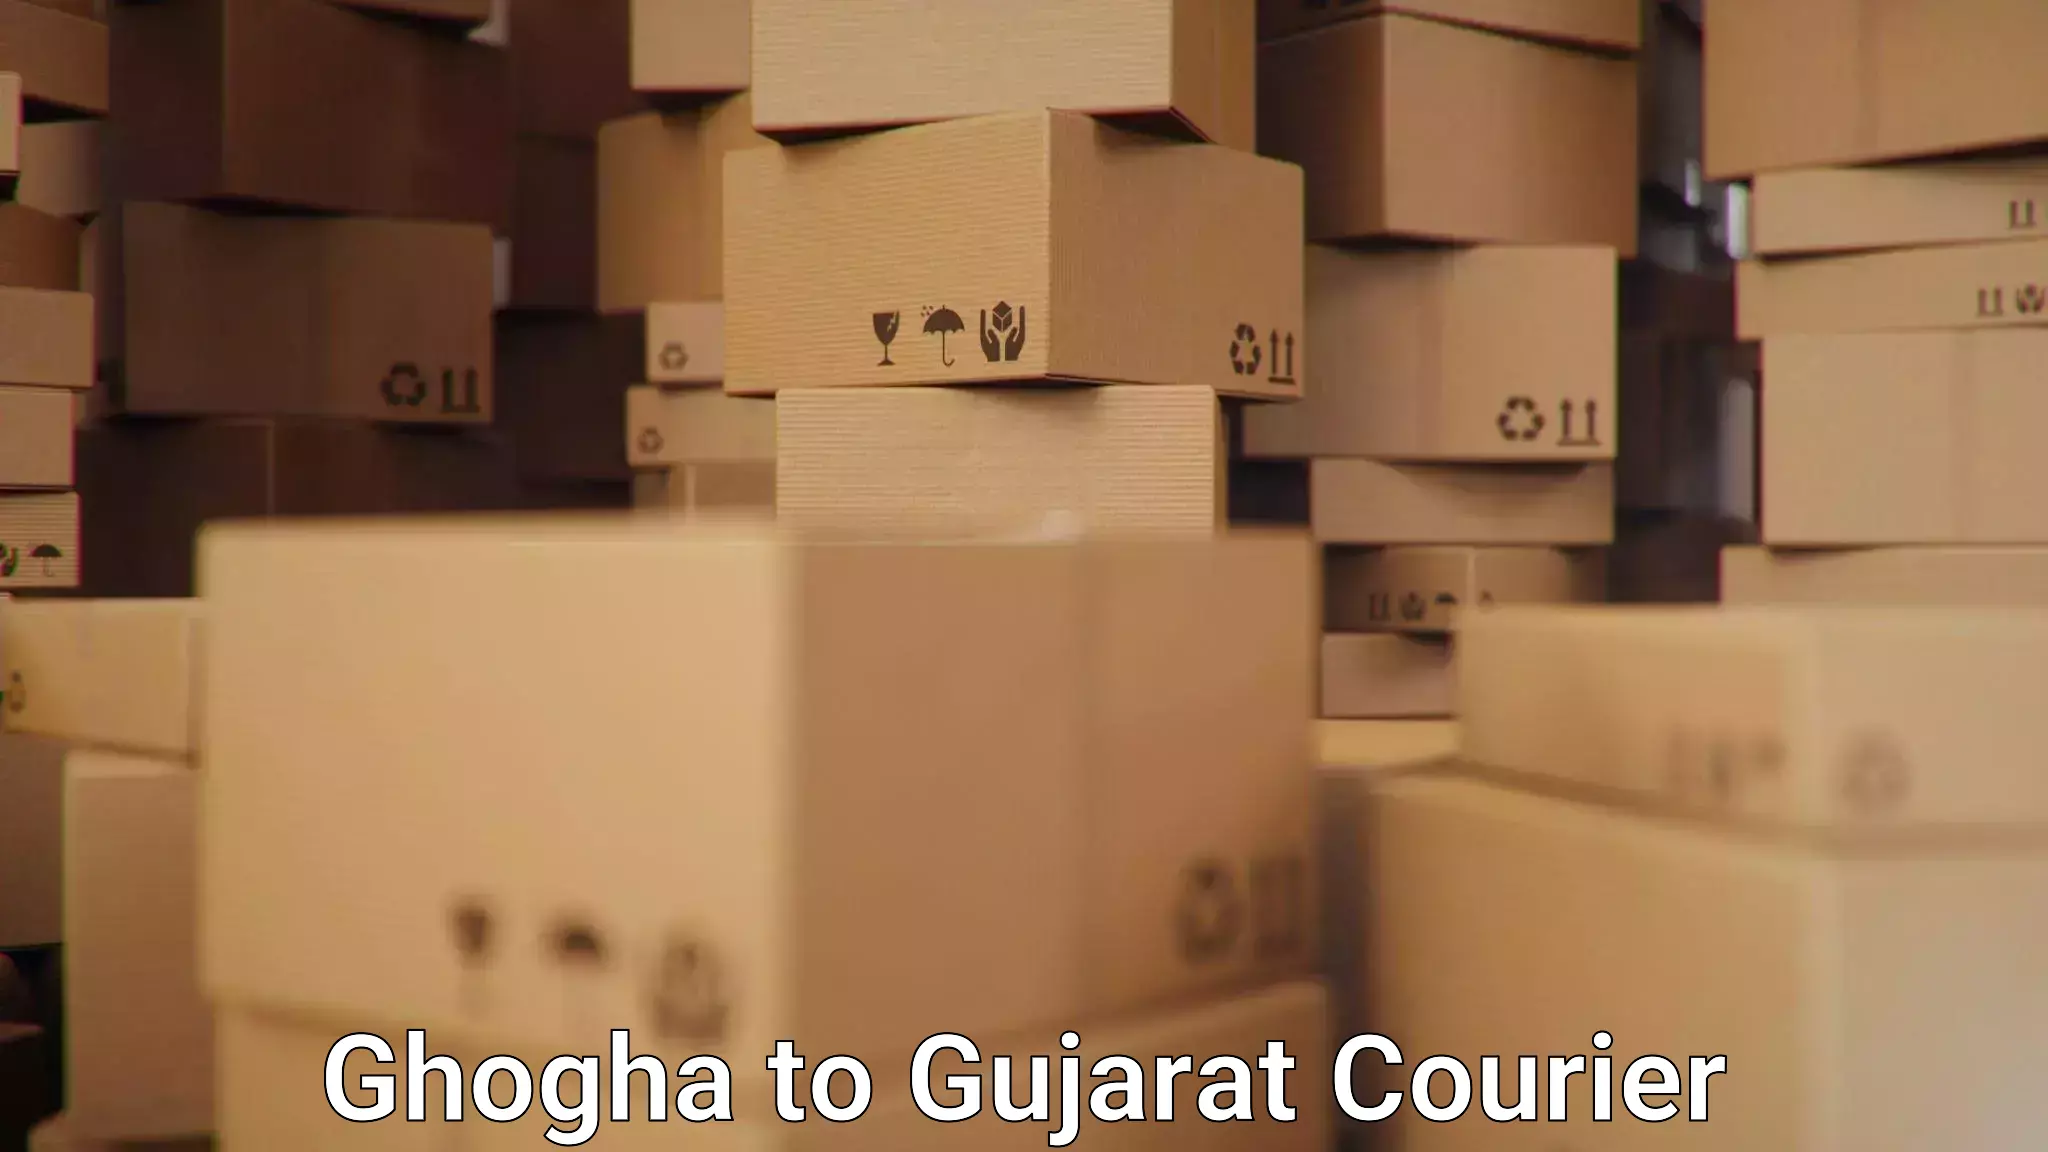 Global courier networks Ghogha to Jasdan